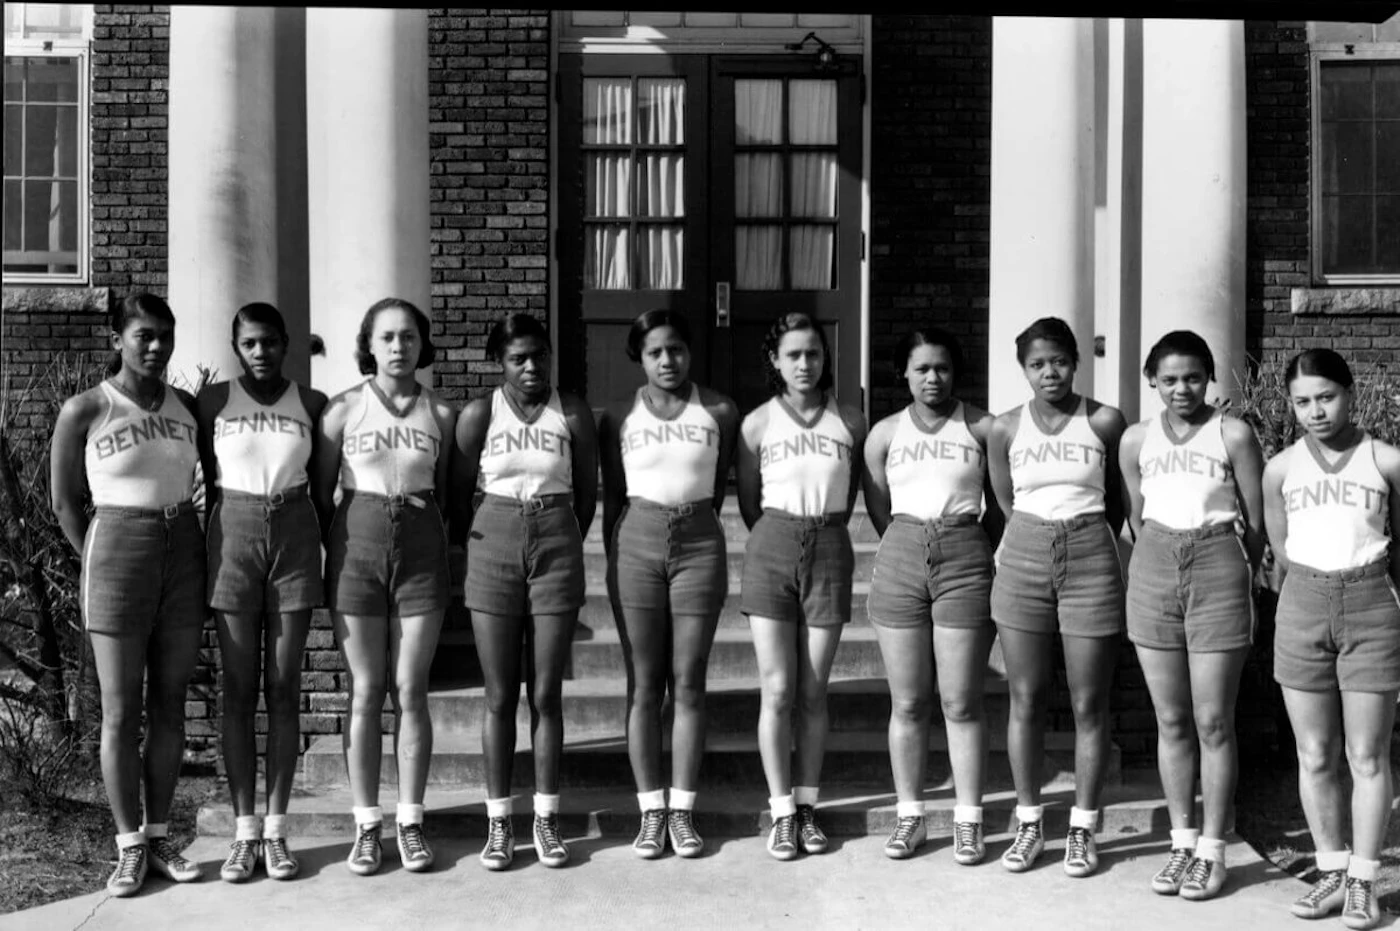 Bennett College team, Greensboro, North Carolina, 1934. Ruth Glover is third from left. (Courtesy of the Greensboro Historical Museum.)